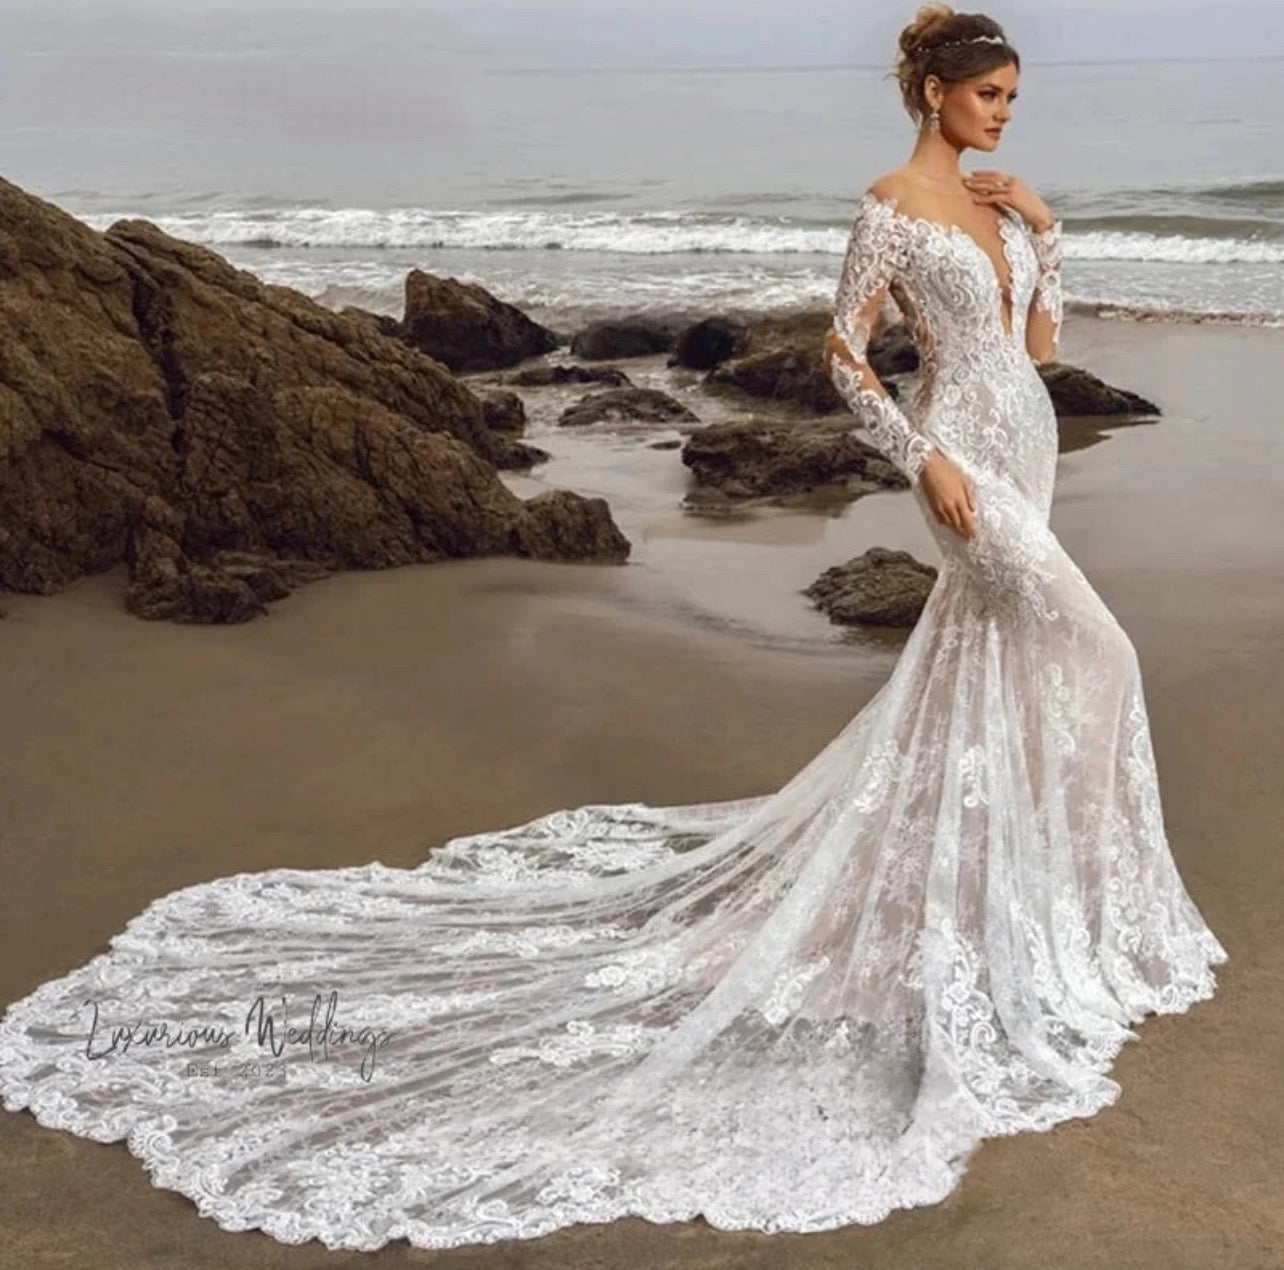 a woman in a wedding dress standing on the beach